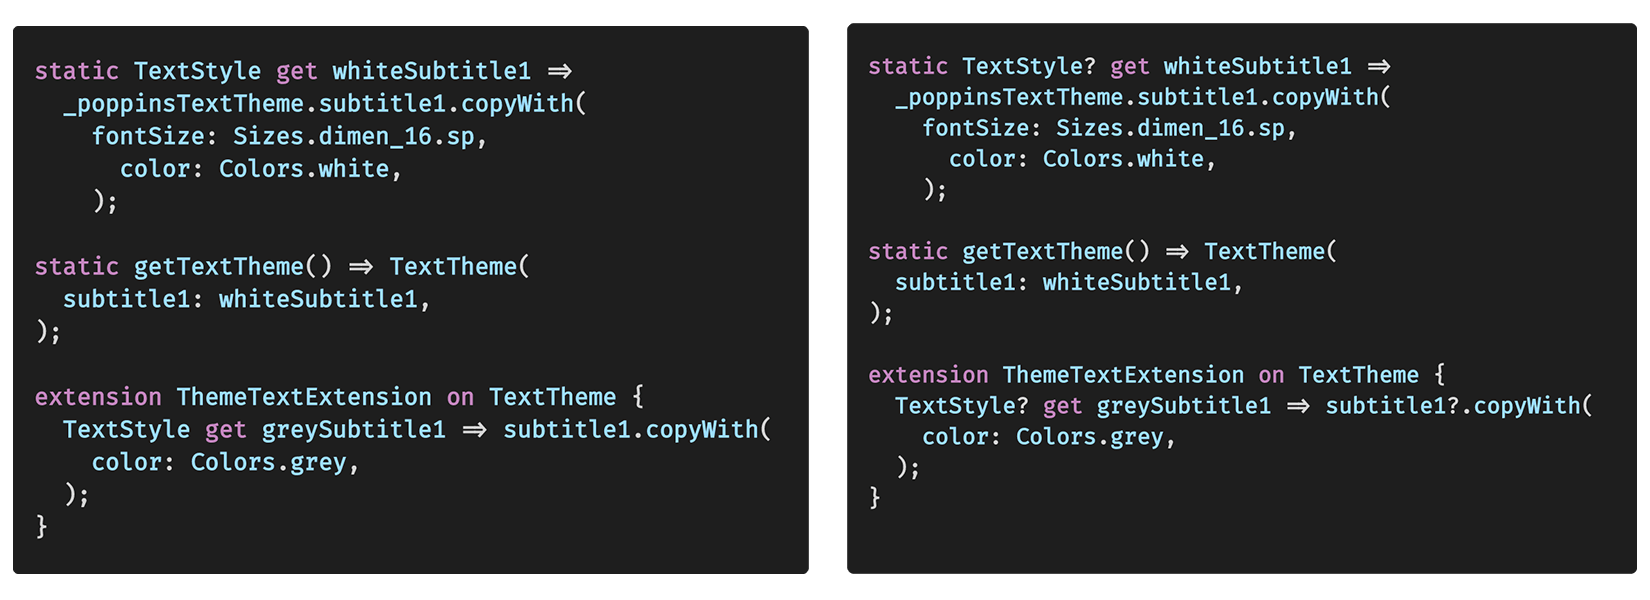 unchecked_use_of_nullable_value_textstyle_comparison.png